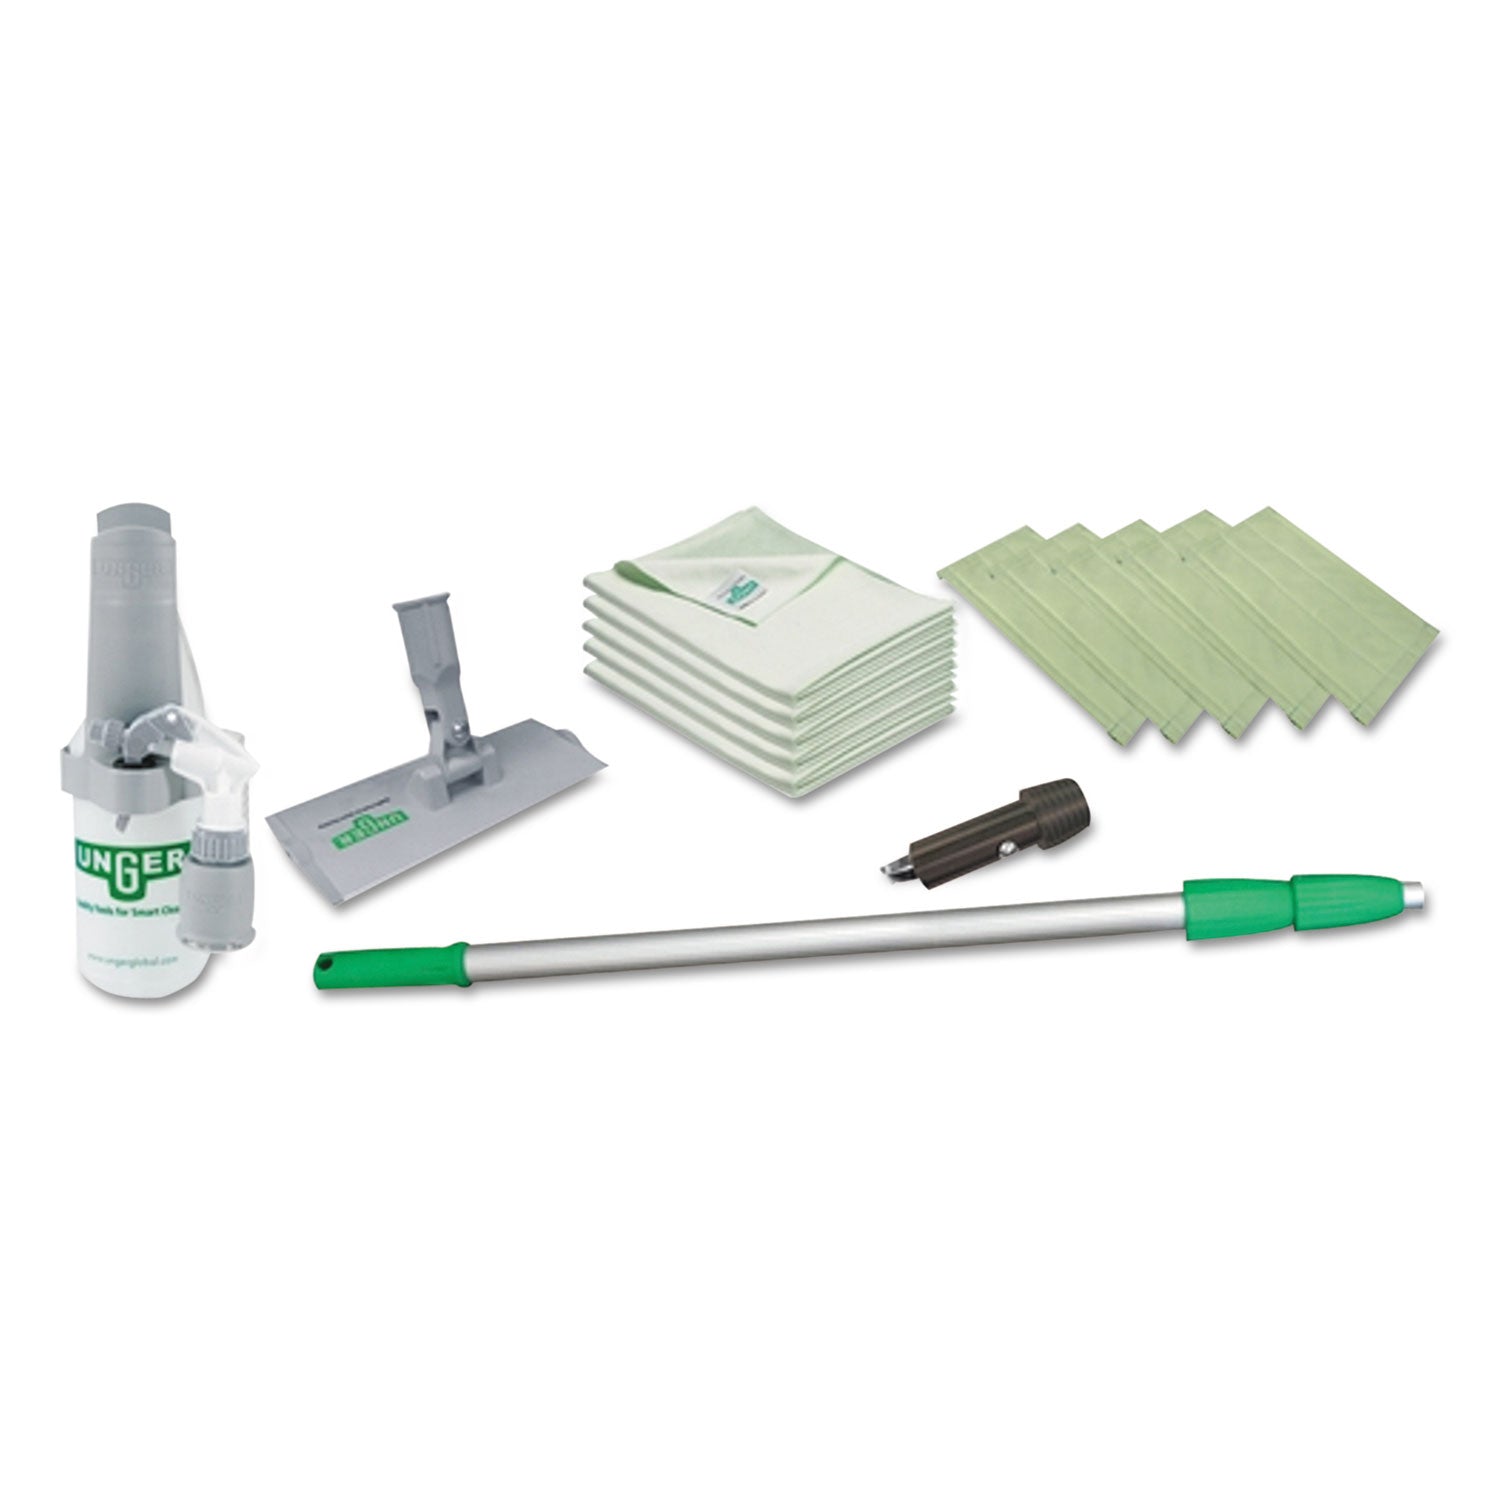 SpeedClean Window Cleaning Kit, 72" to 80", Extension Pole With 8" Pad Holder, Silver/Green - 